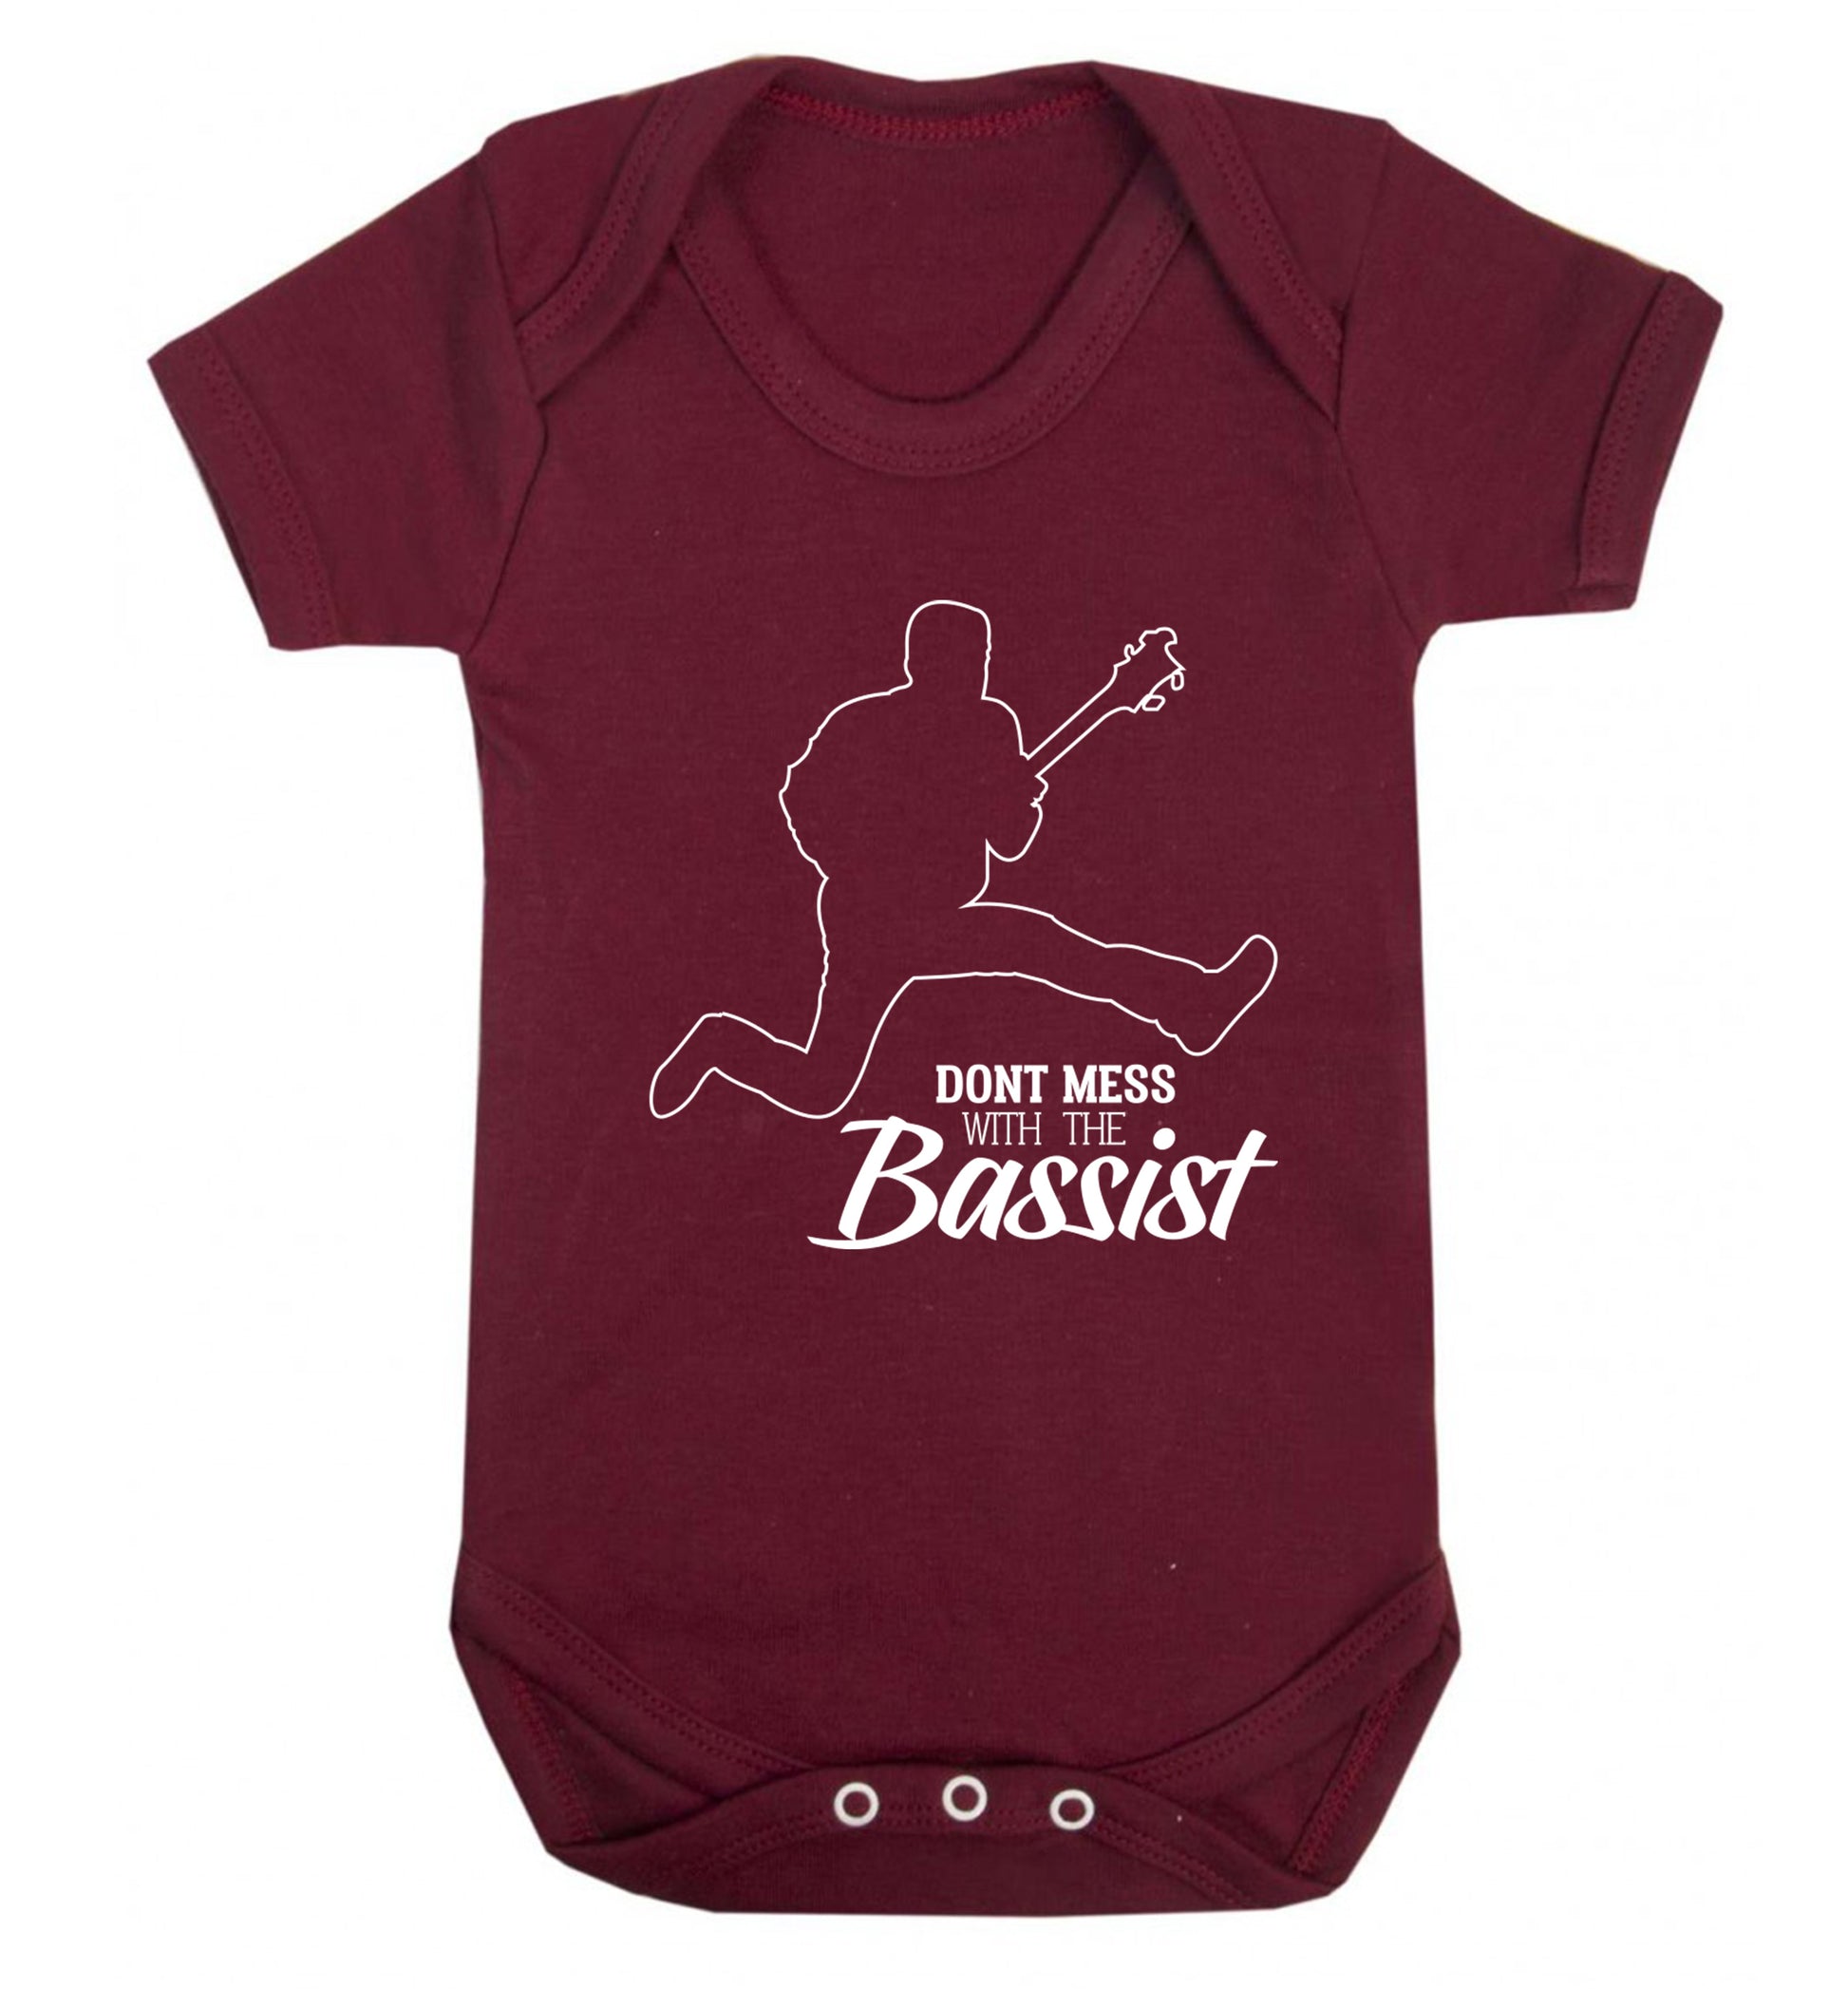 Dont mess with the bassist Baby Vest maroon 18-24 months